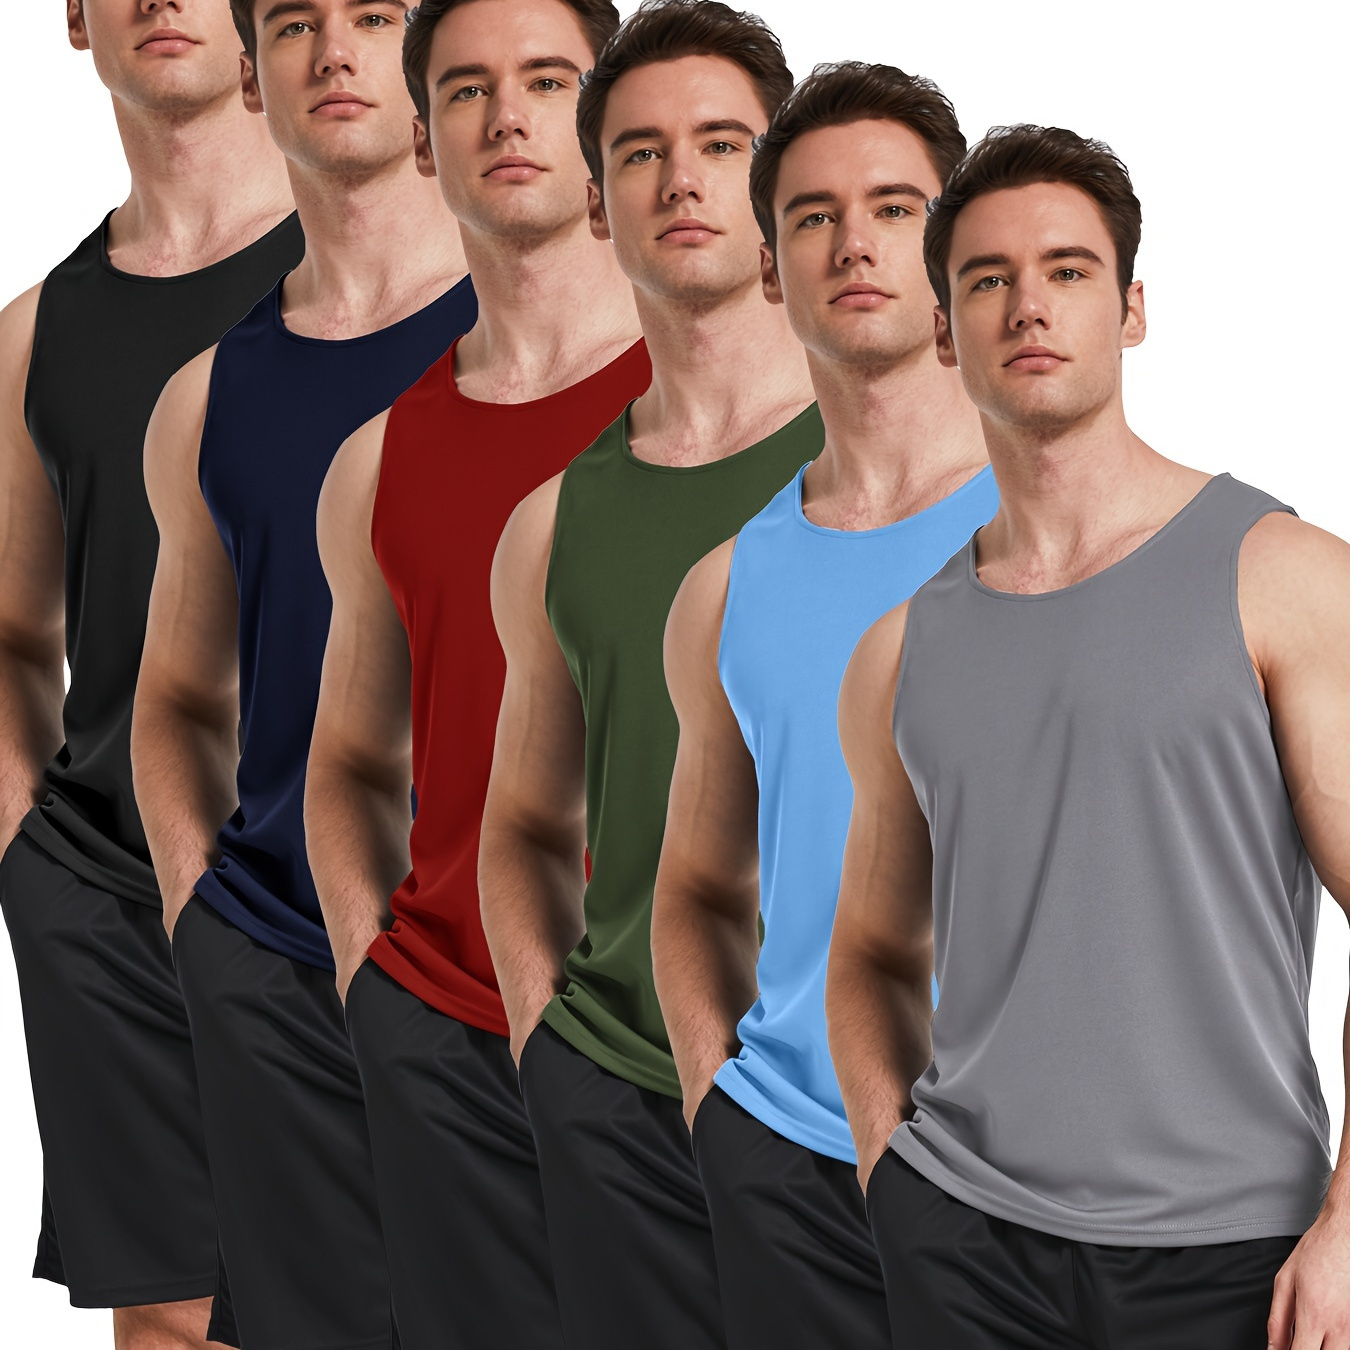 

6pcs Summer Men's Quick Dry Moisture-wicking Breathable Tank Tops, Athletic Gym Bodybuilding Sports Sleeveless Shirts, For Running Training, Men's Clothing